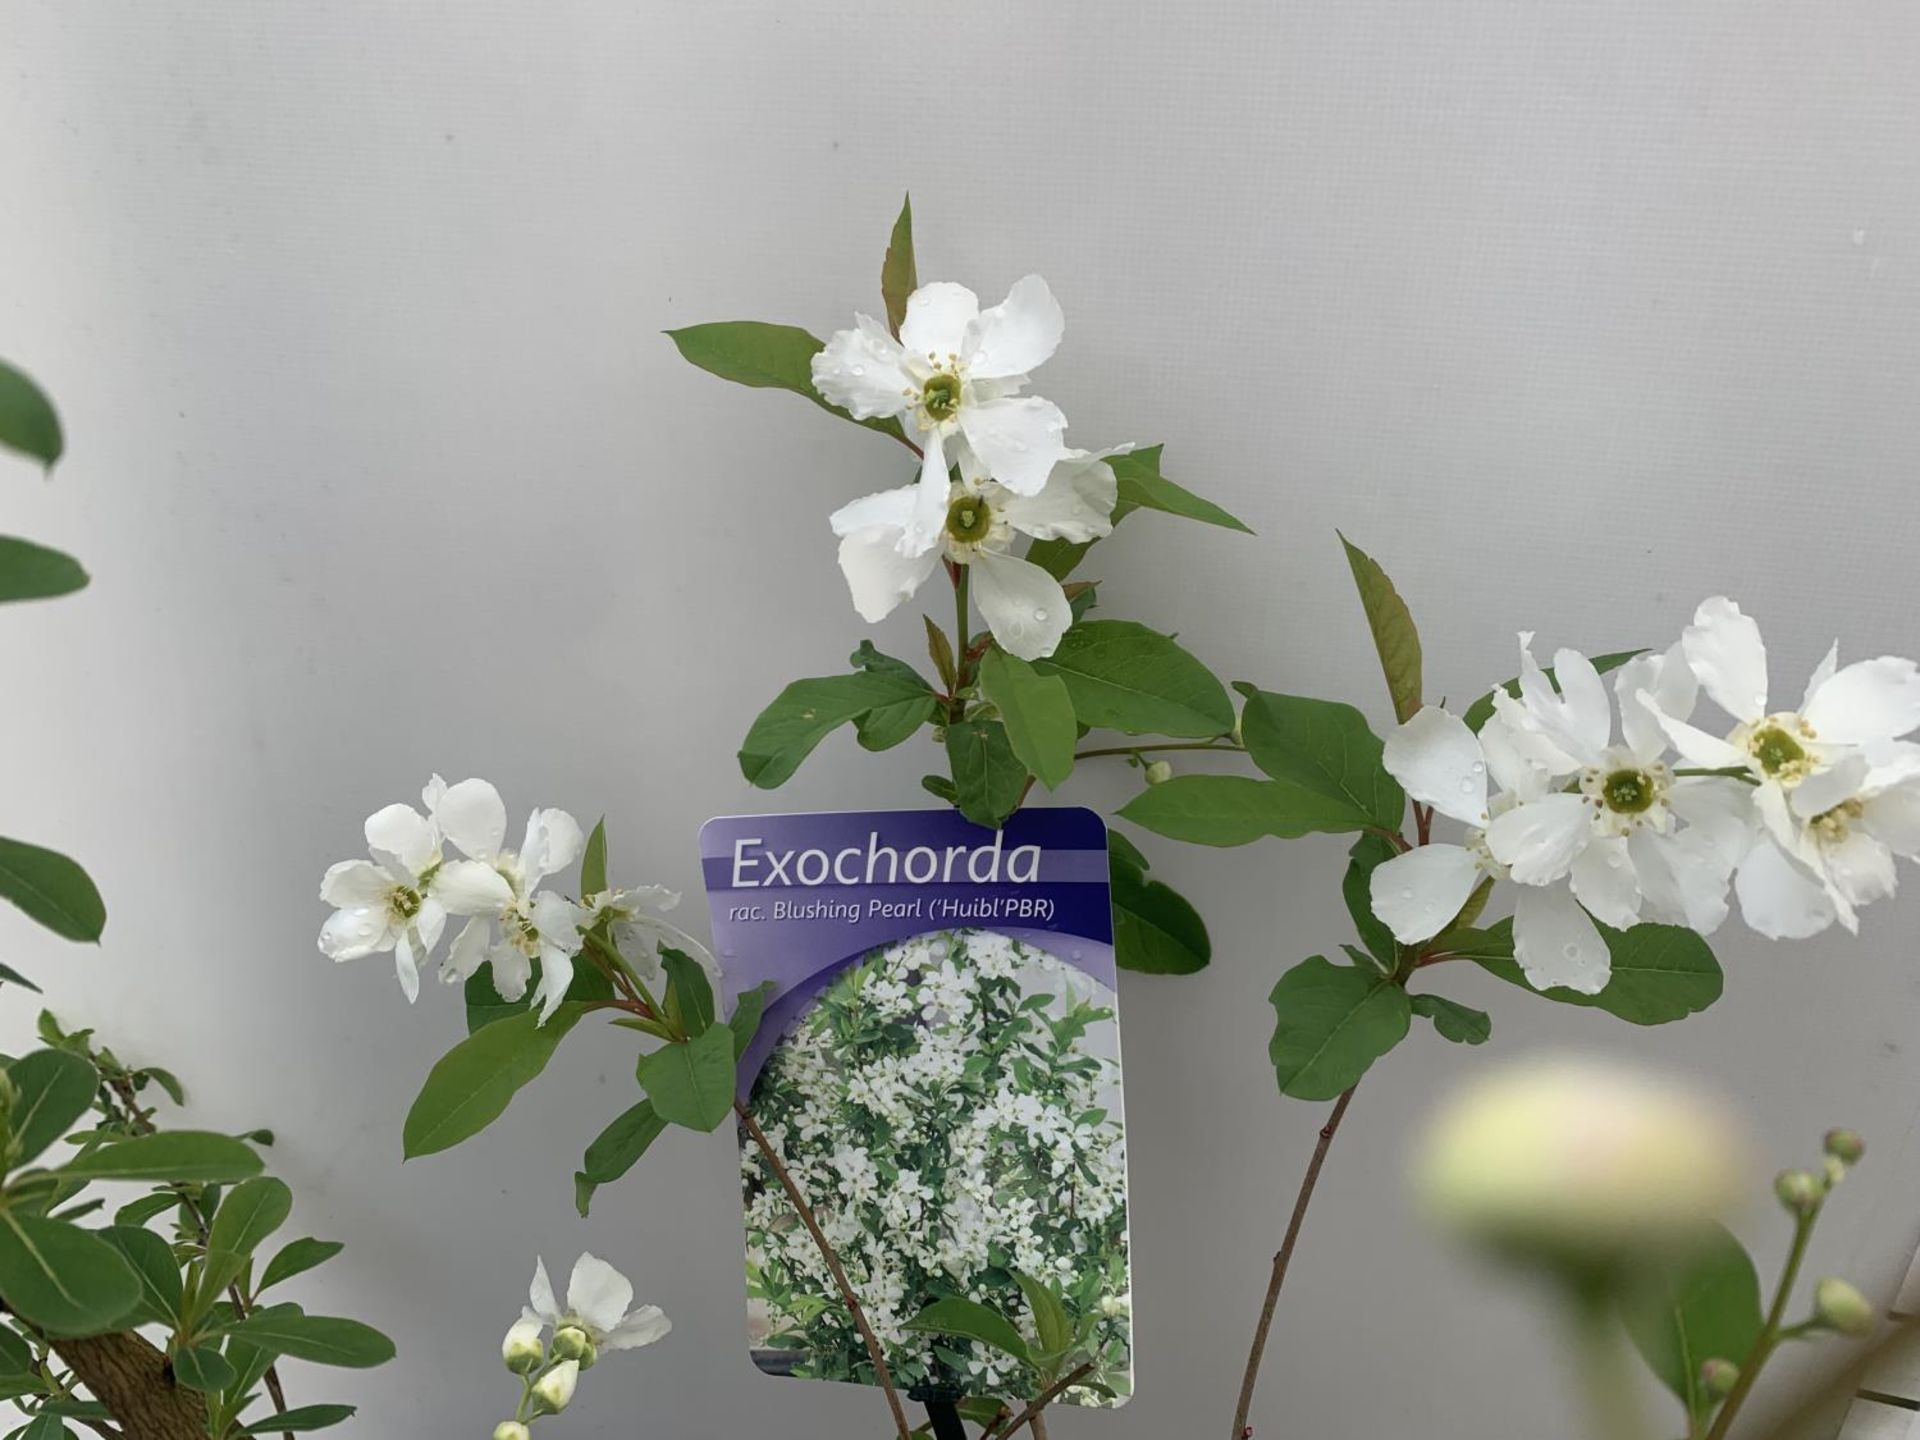 TWO EXOCHORDA 'NIAGARA' AND 'BLUSHING PEARL' APPROX 60CM IN HEIGHT IN 2 LTR POTS PLUS VAT TO BE SOLD - Bild 3 aus 6